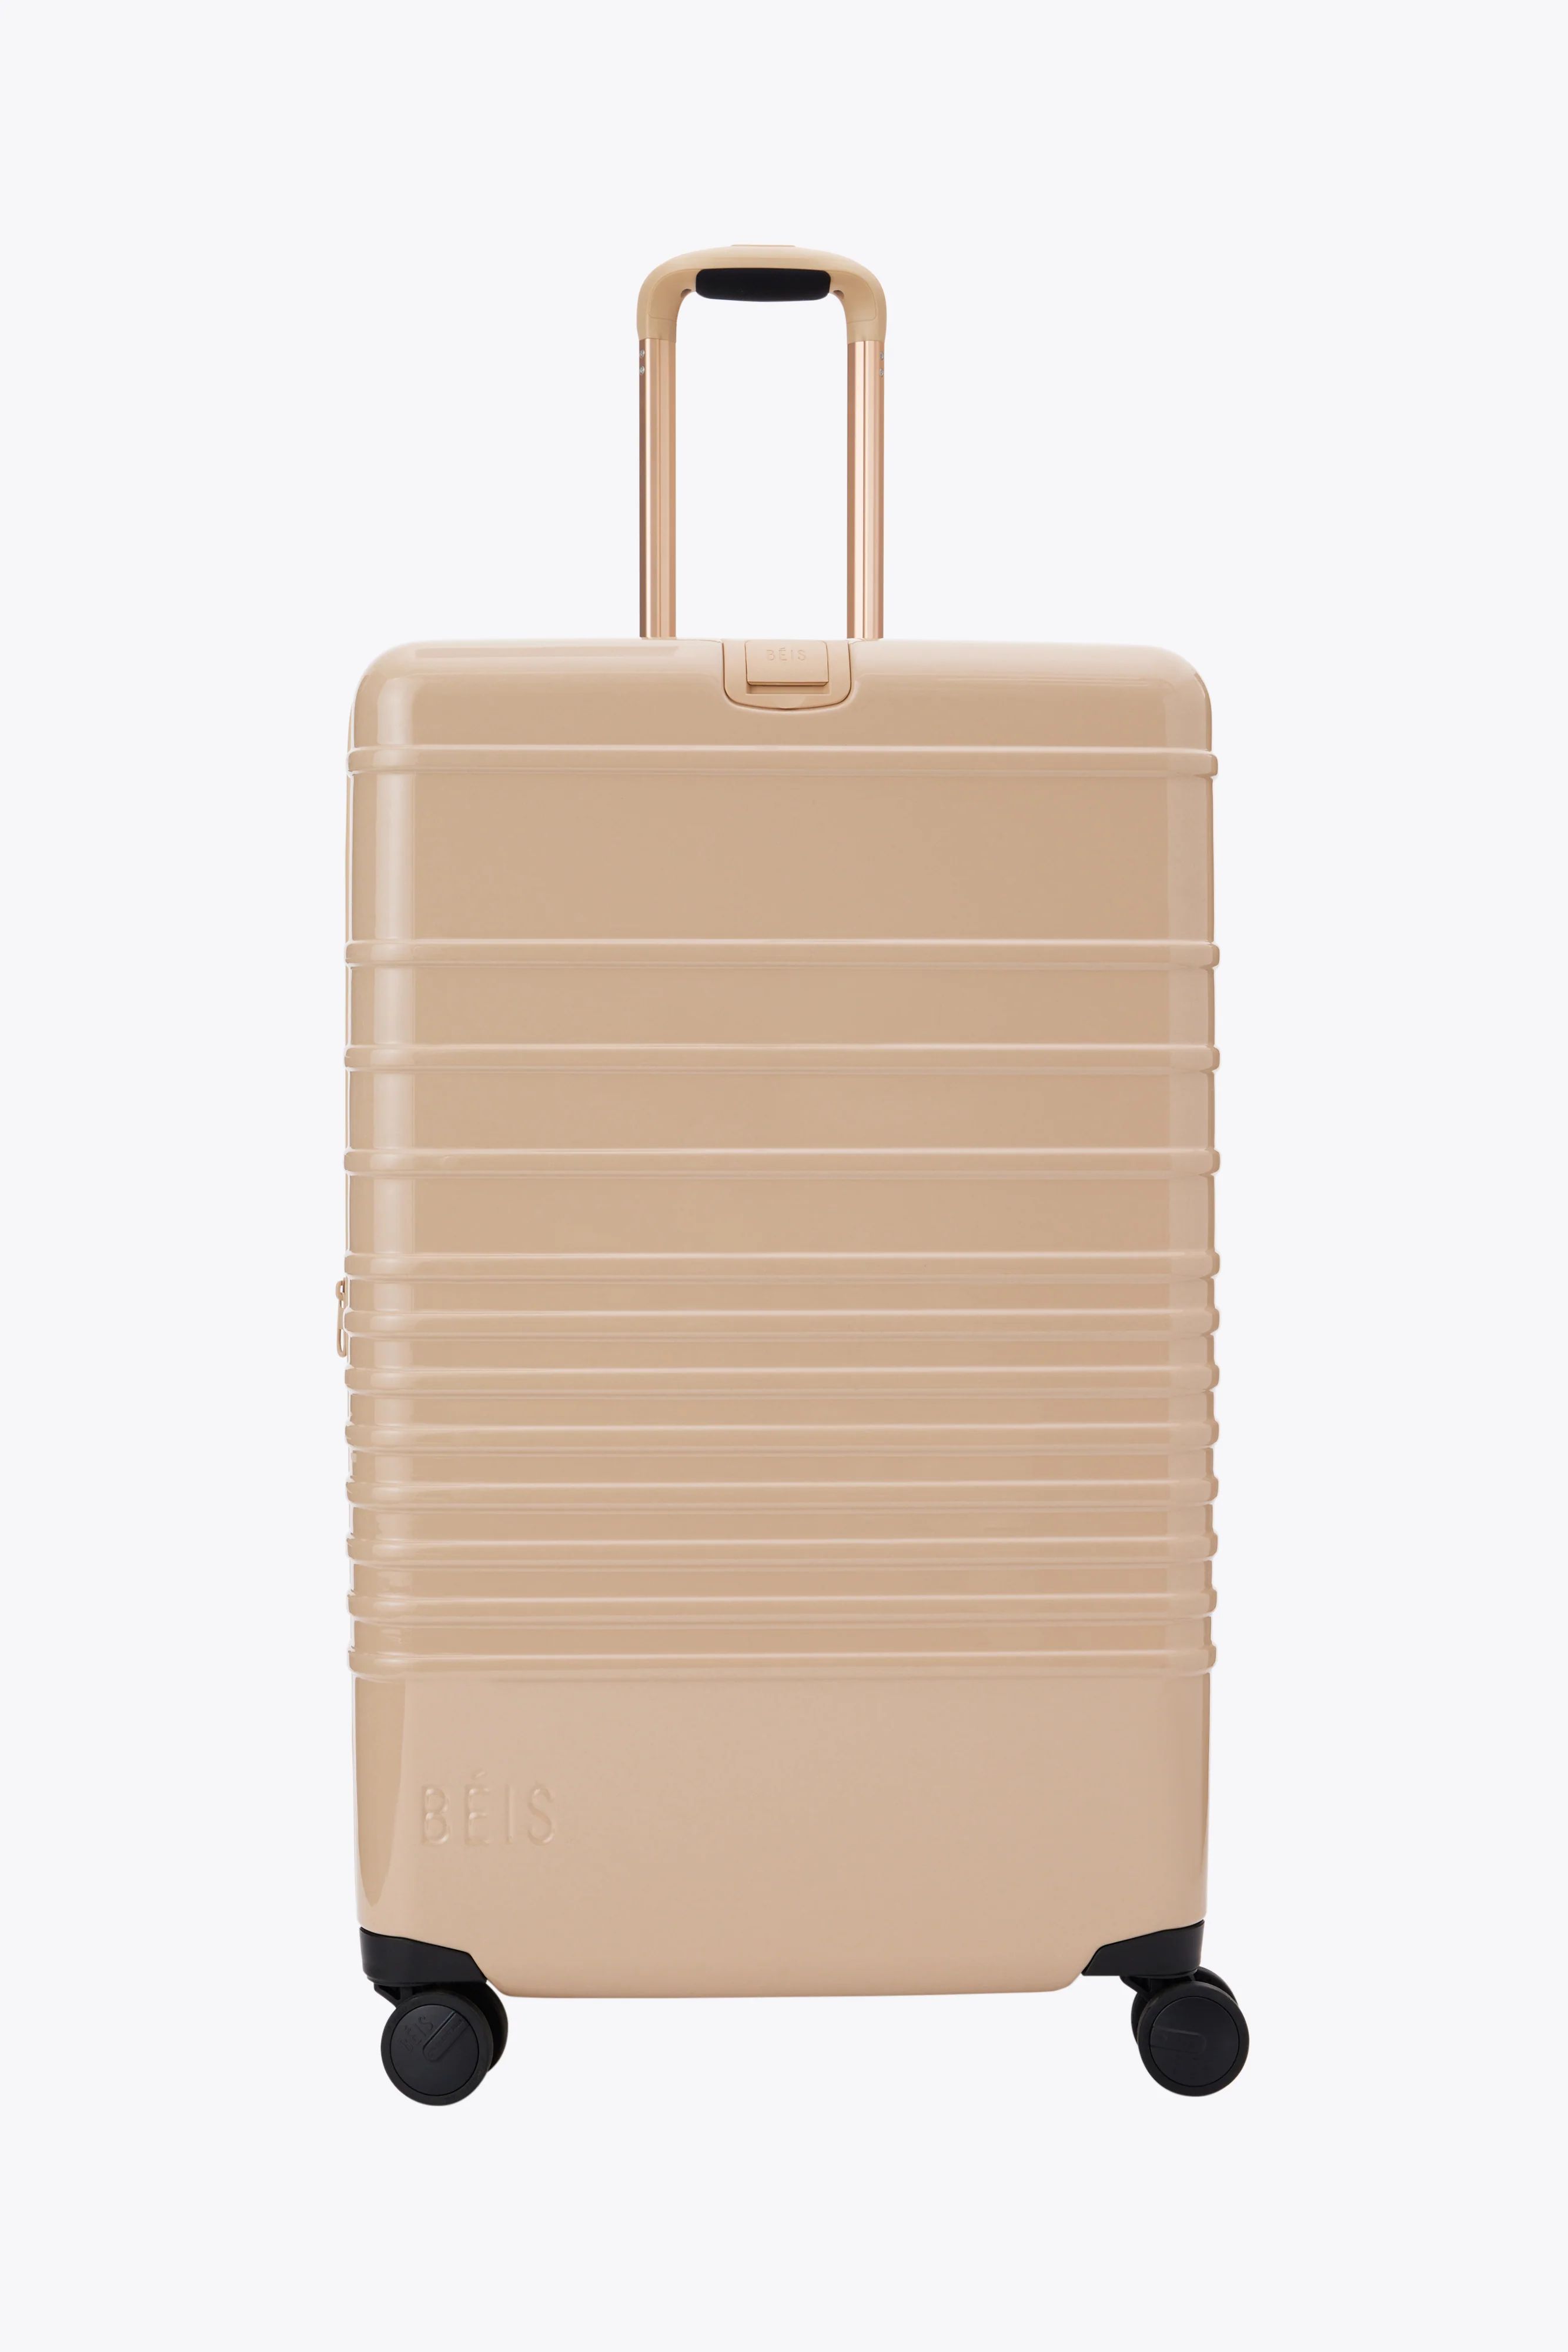 THE LARGE CHECK-IN ROLLER IN GLOSSY BEIGE | BÉIS Travel